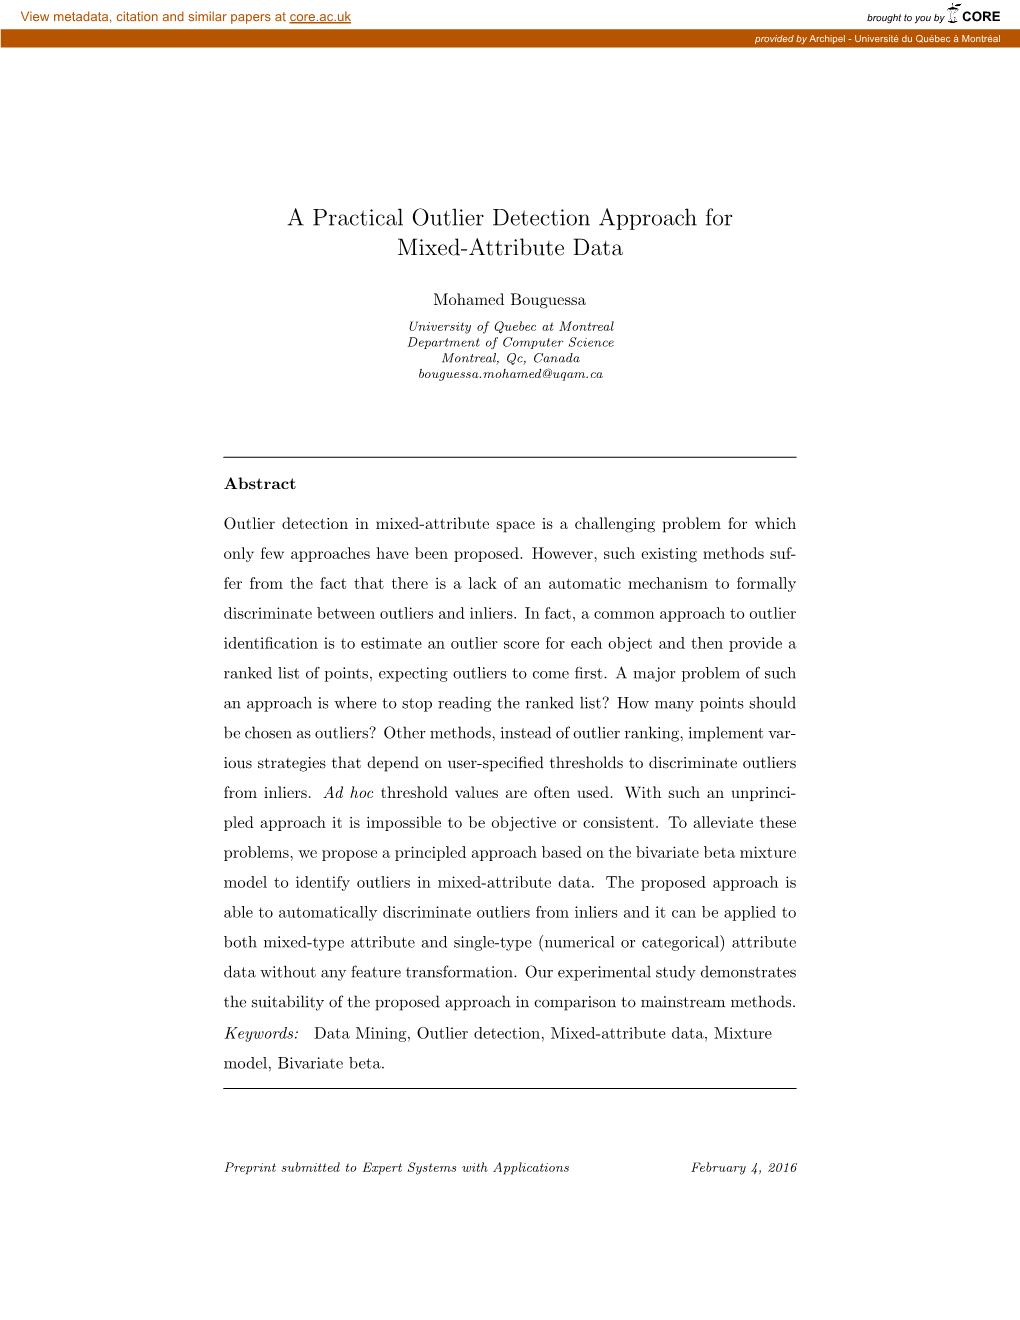 A Practical Outlier Detection Approach for Mixed-Attribute Data